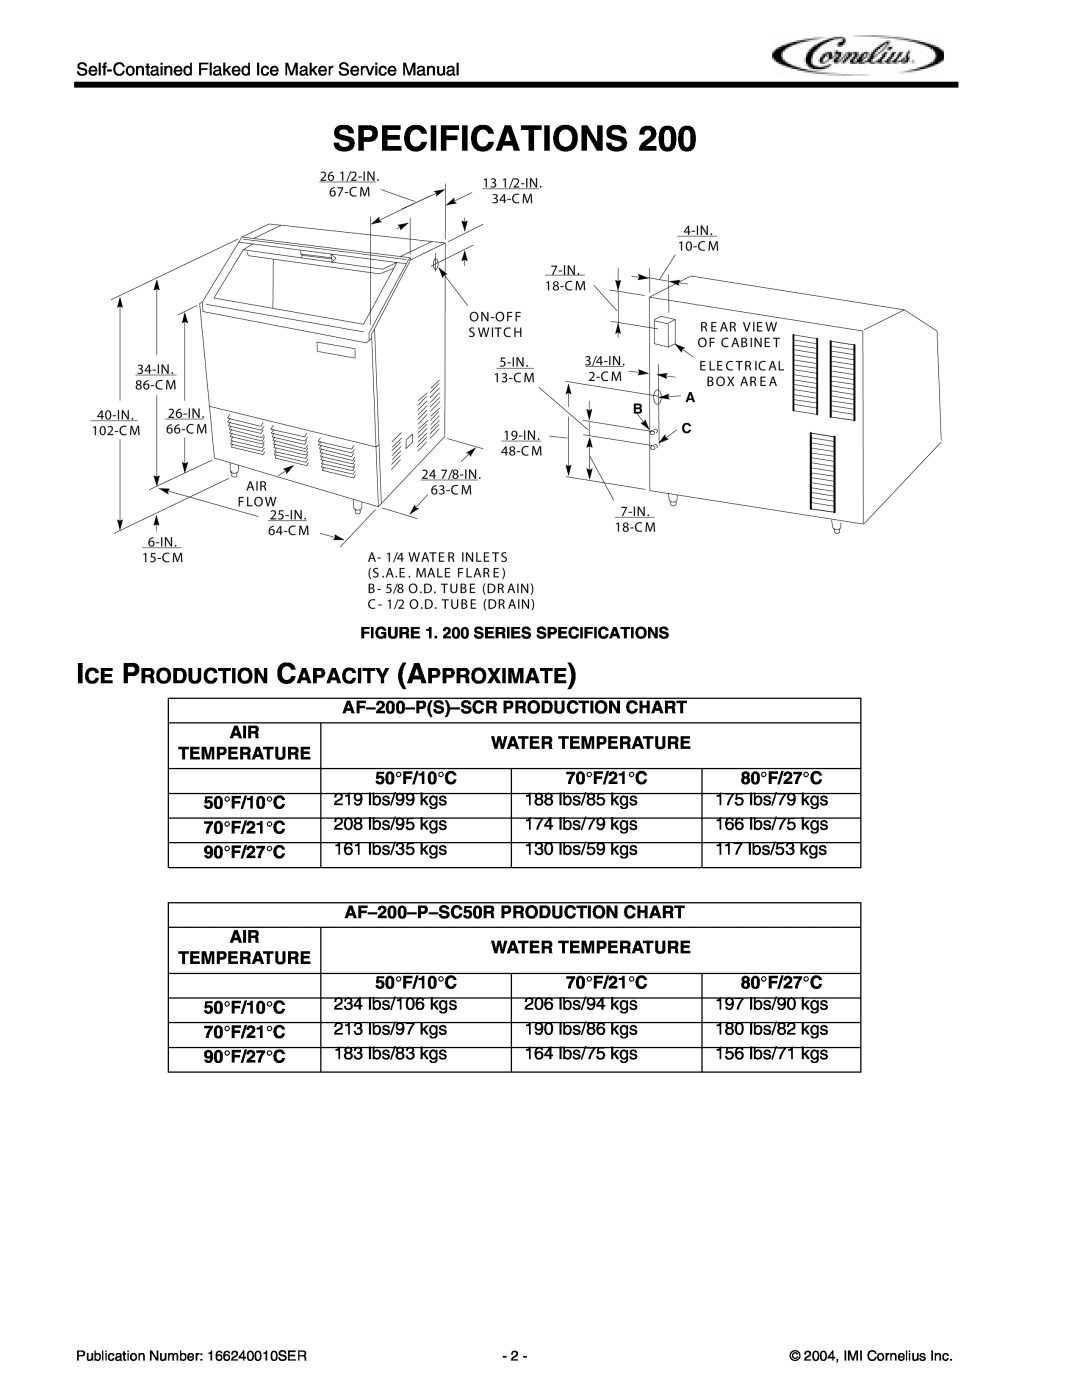 Cornelius Series 525, Series 200, Series 725 service manual Specifications, Ice Production Capacity Approximate 